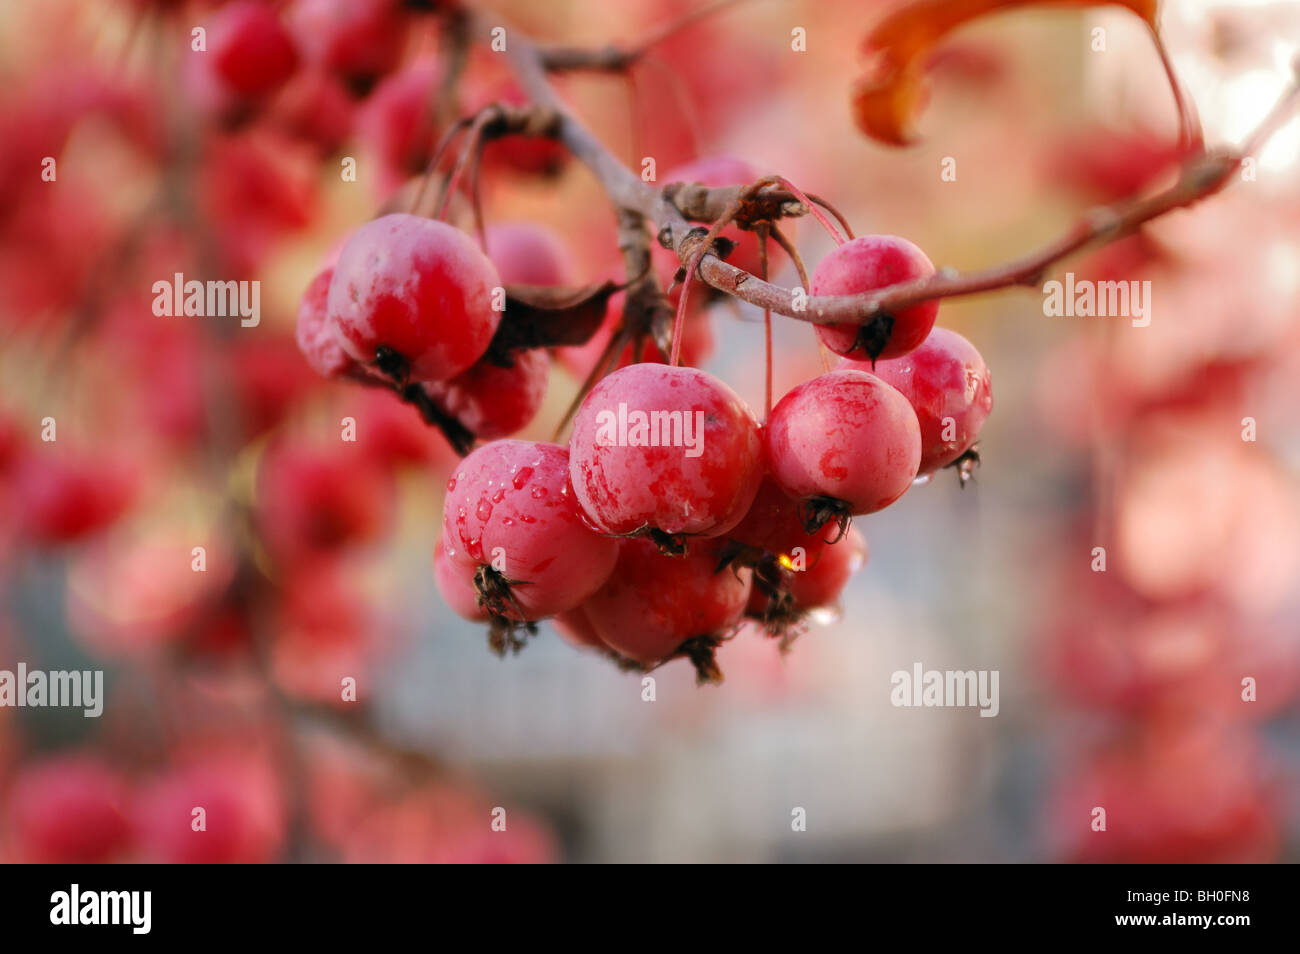 A branch of crab apple tree with bunch of ripe red fruits on a blurry background Stock Photo